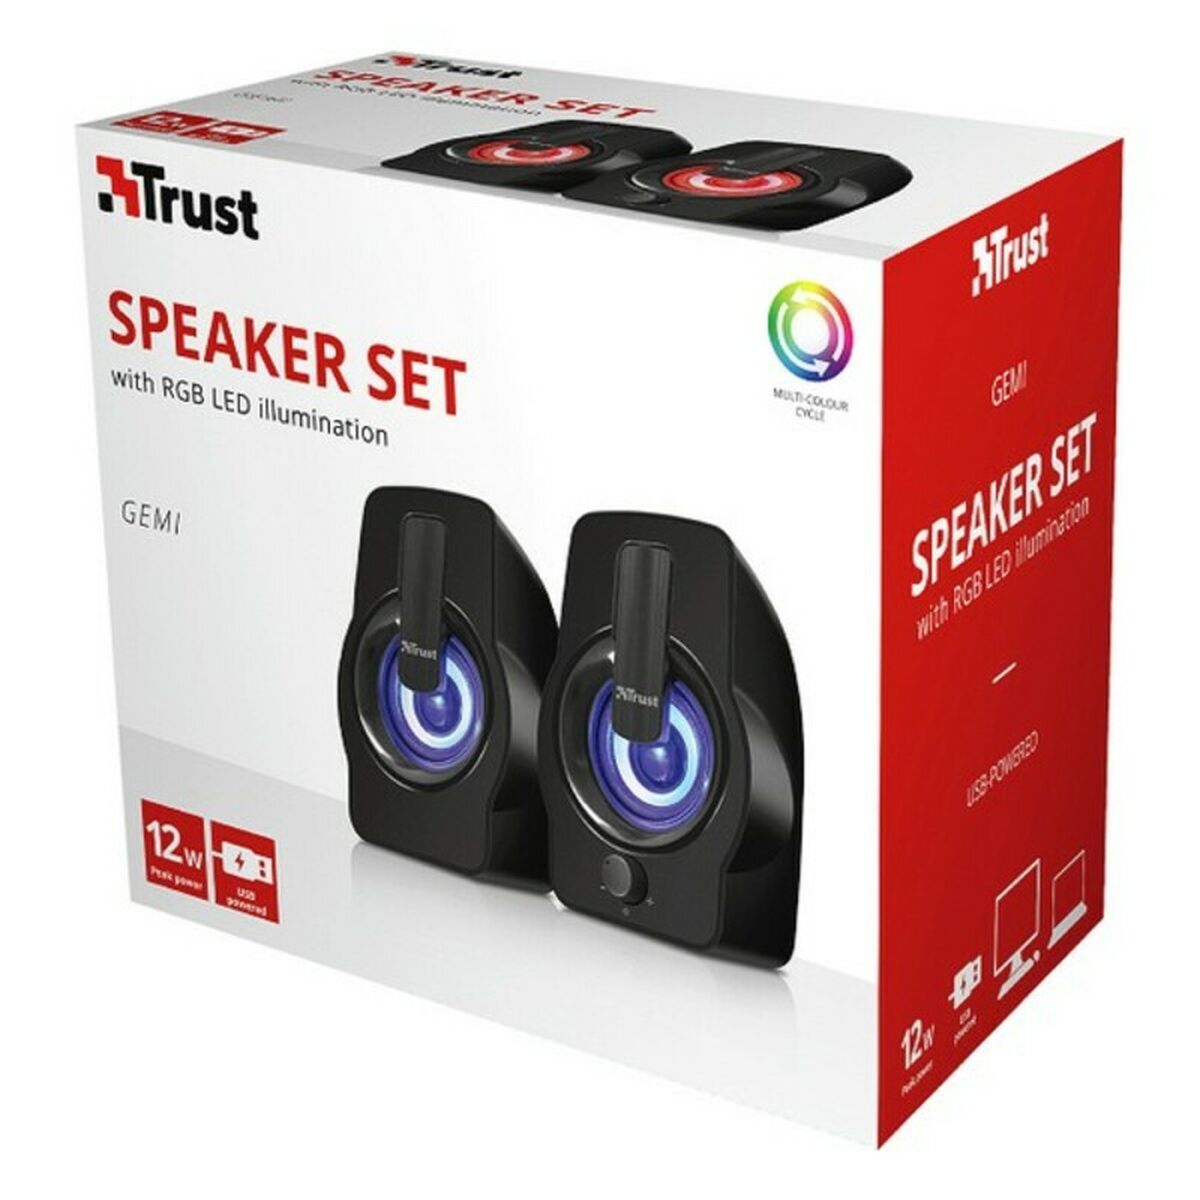 PC Speakers Trust Gemi RGB Black 6 W 12 W, Trust, Computing, Accessories, pc-speakers-trust-gemi-rgb-black-6-w-12-w, Brand_Trust, category-reference-2609, category-reference-2642, category-reference-2945, category-reference-t-19685, category-reference-t-19908, category-reference-t-21340, category-reference-t-25571, computers / peripherals, Condition_NEW, entertainment, music, office, Price_20 - 50, Teleworking, RiotNook